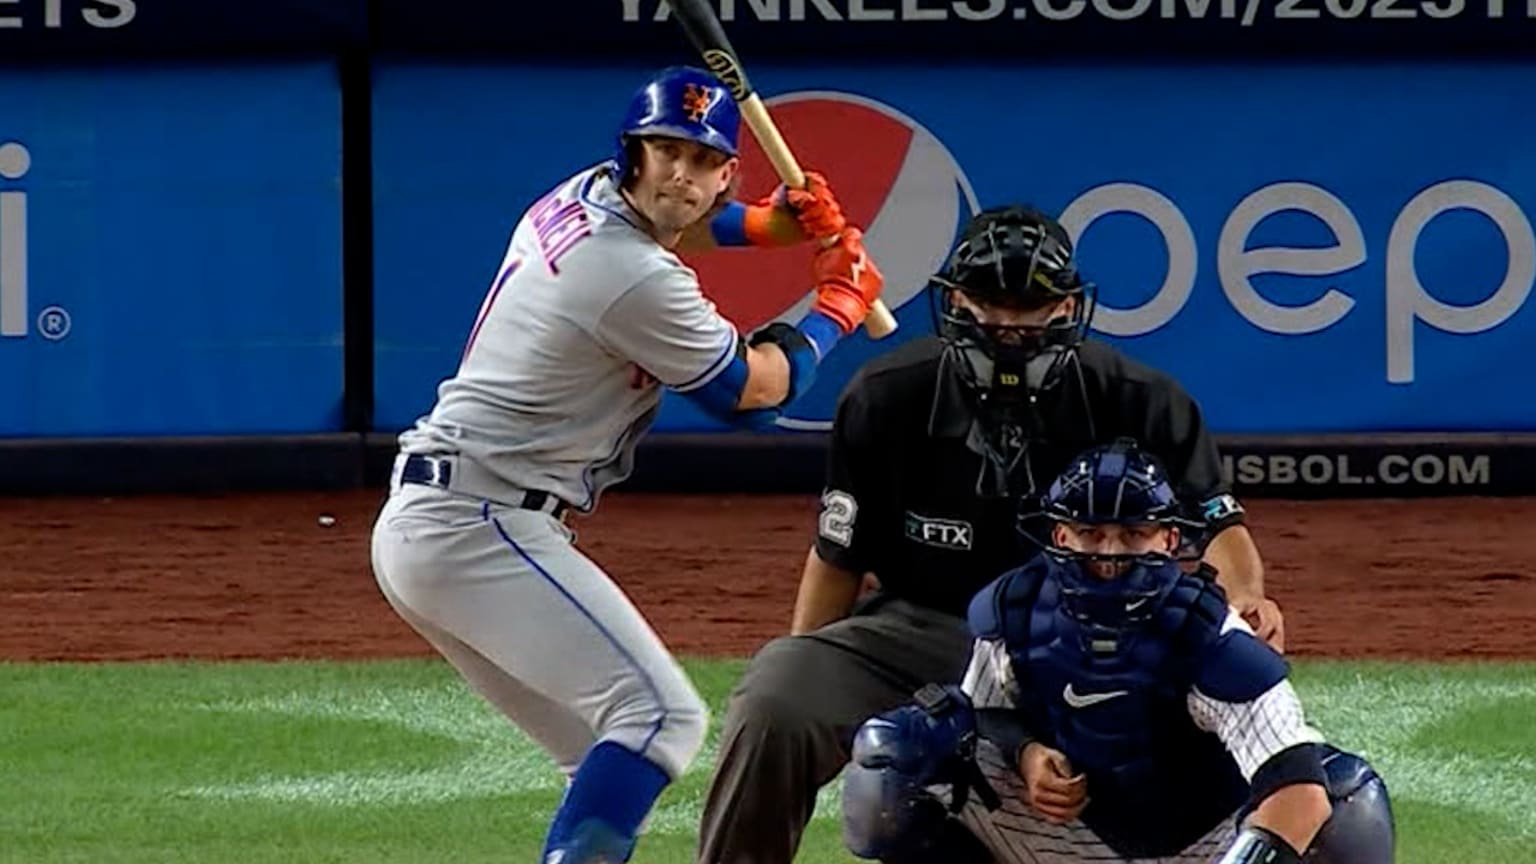 Mets Season Review: Aside from dugout fireworks, Jeff McNeil was boring in  2021 - Amazin' Avenue